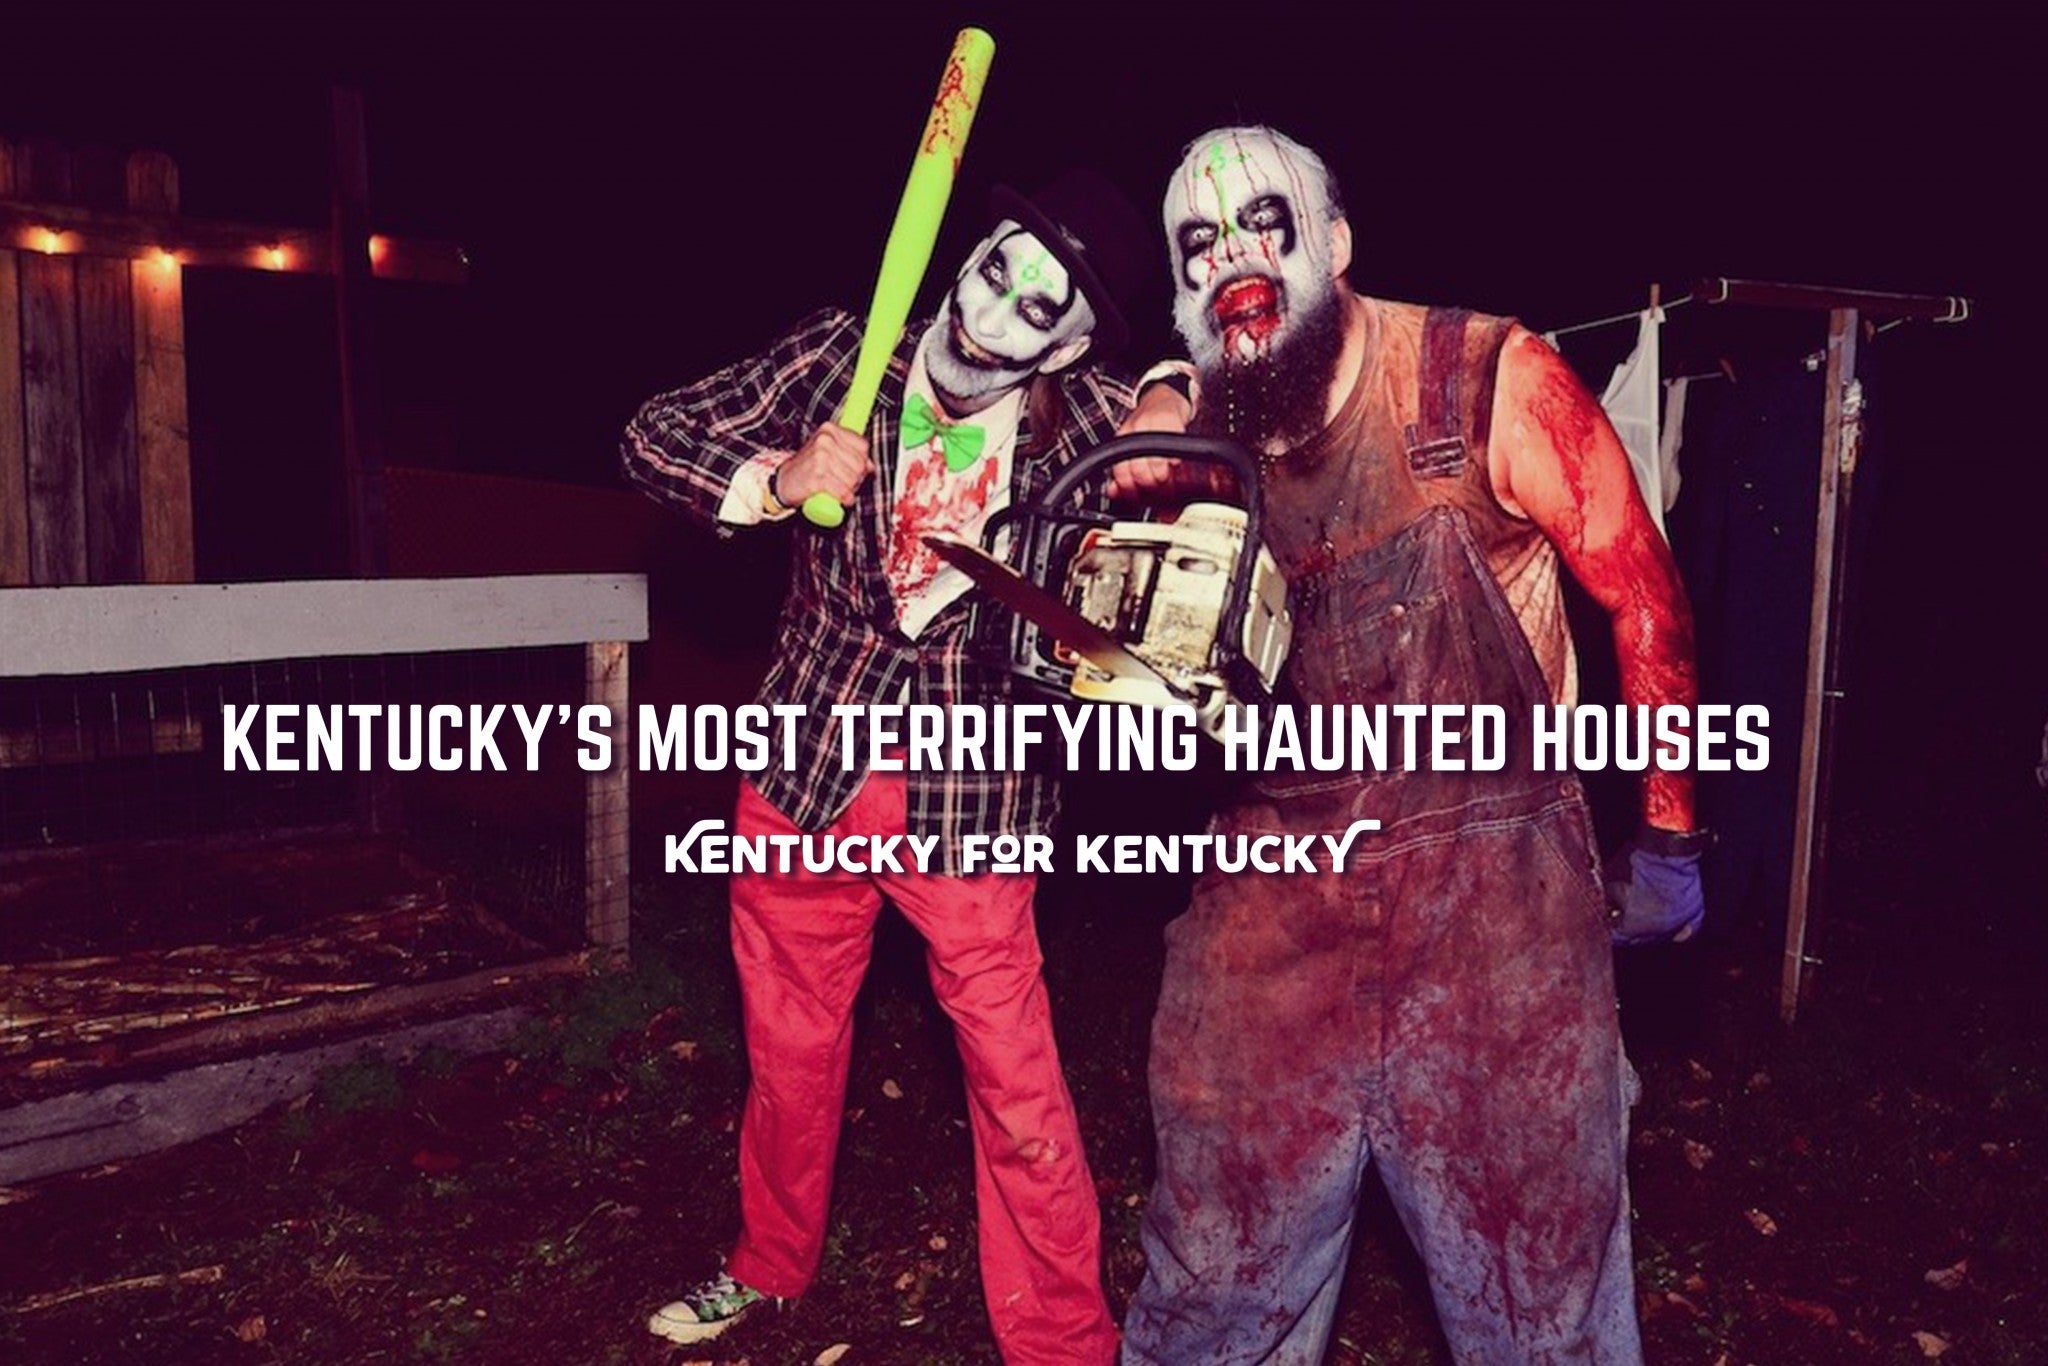 Kentucky's Most Terrifying Haunted Houses